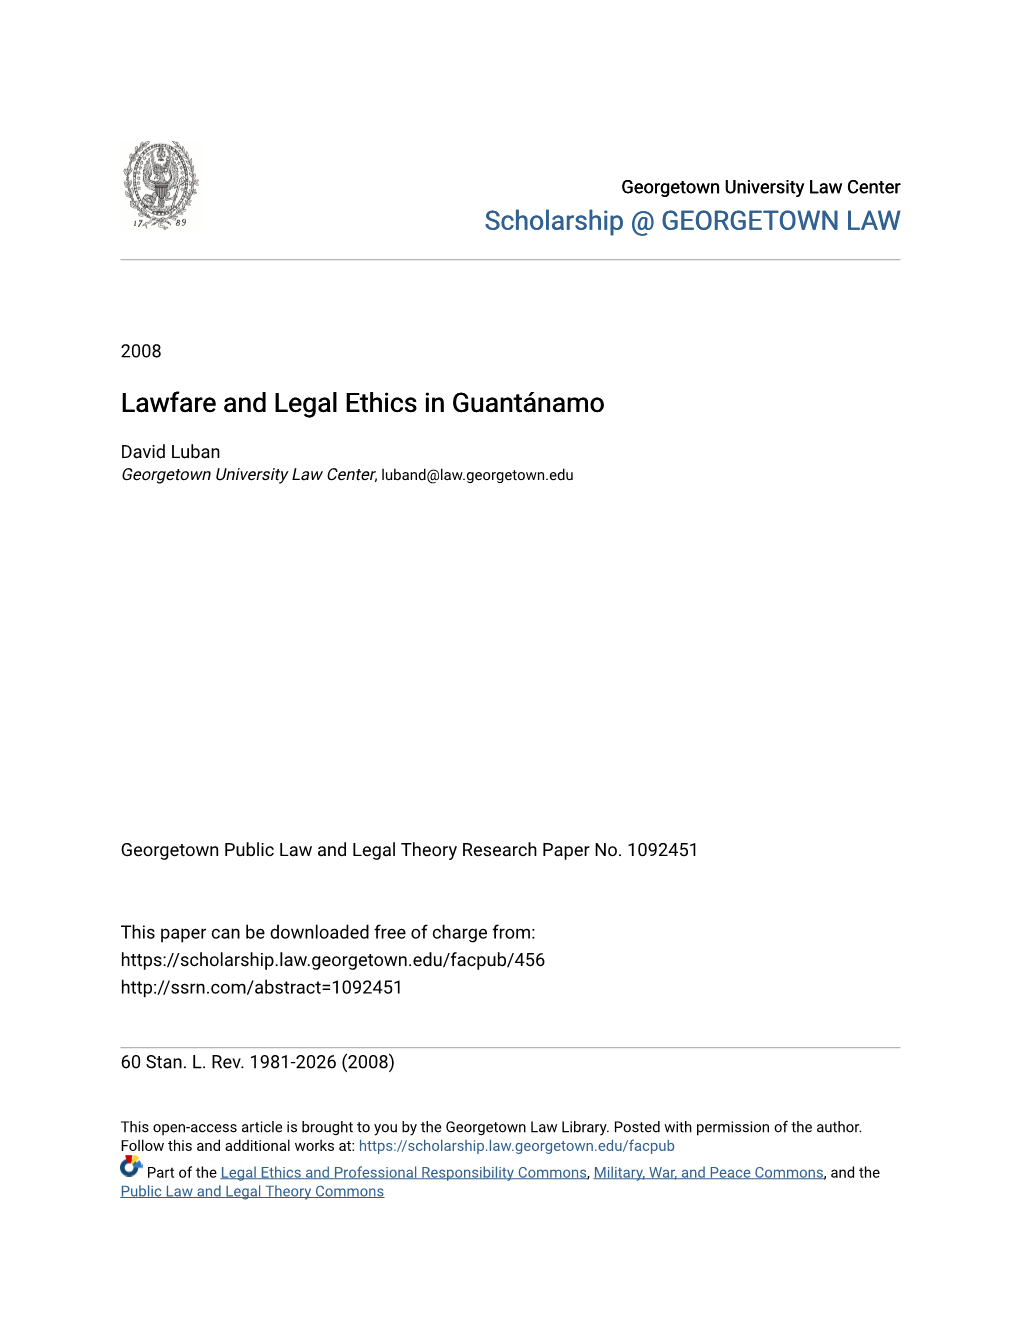 Lawfare and Legal Ethics in Guantánamo